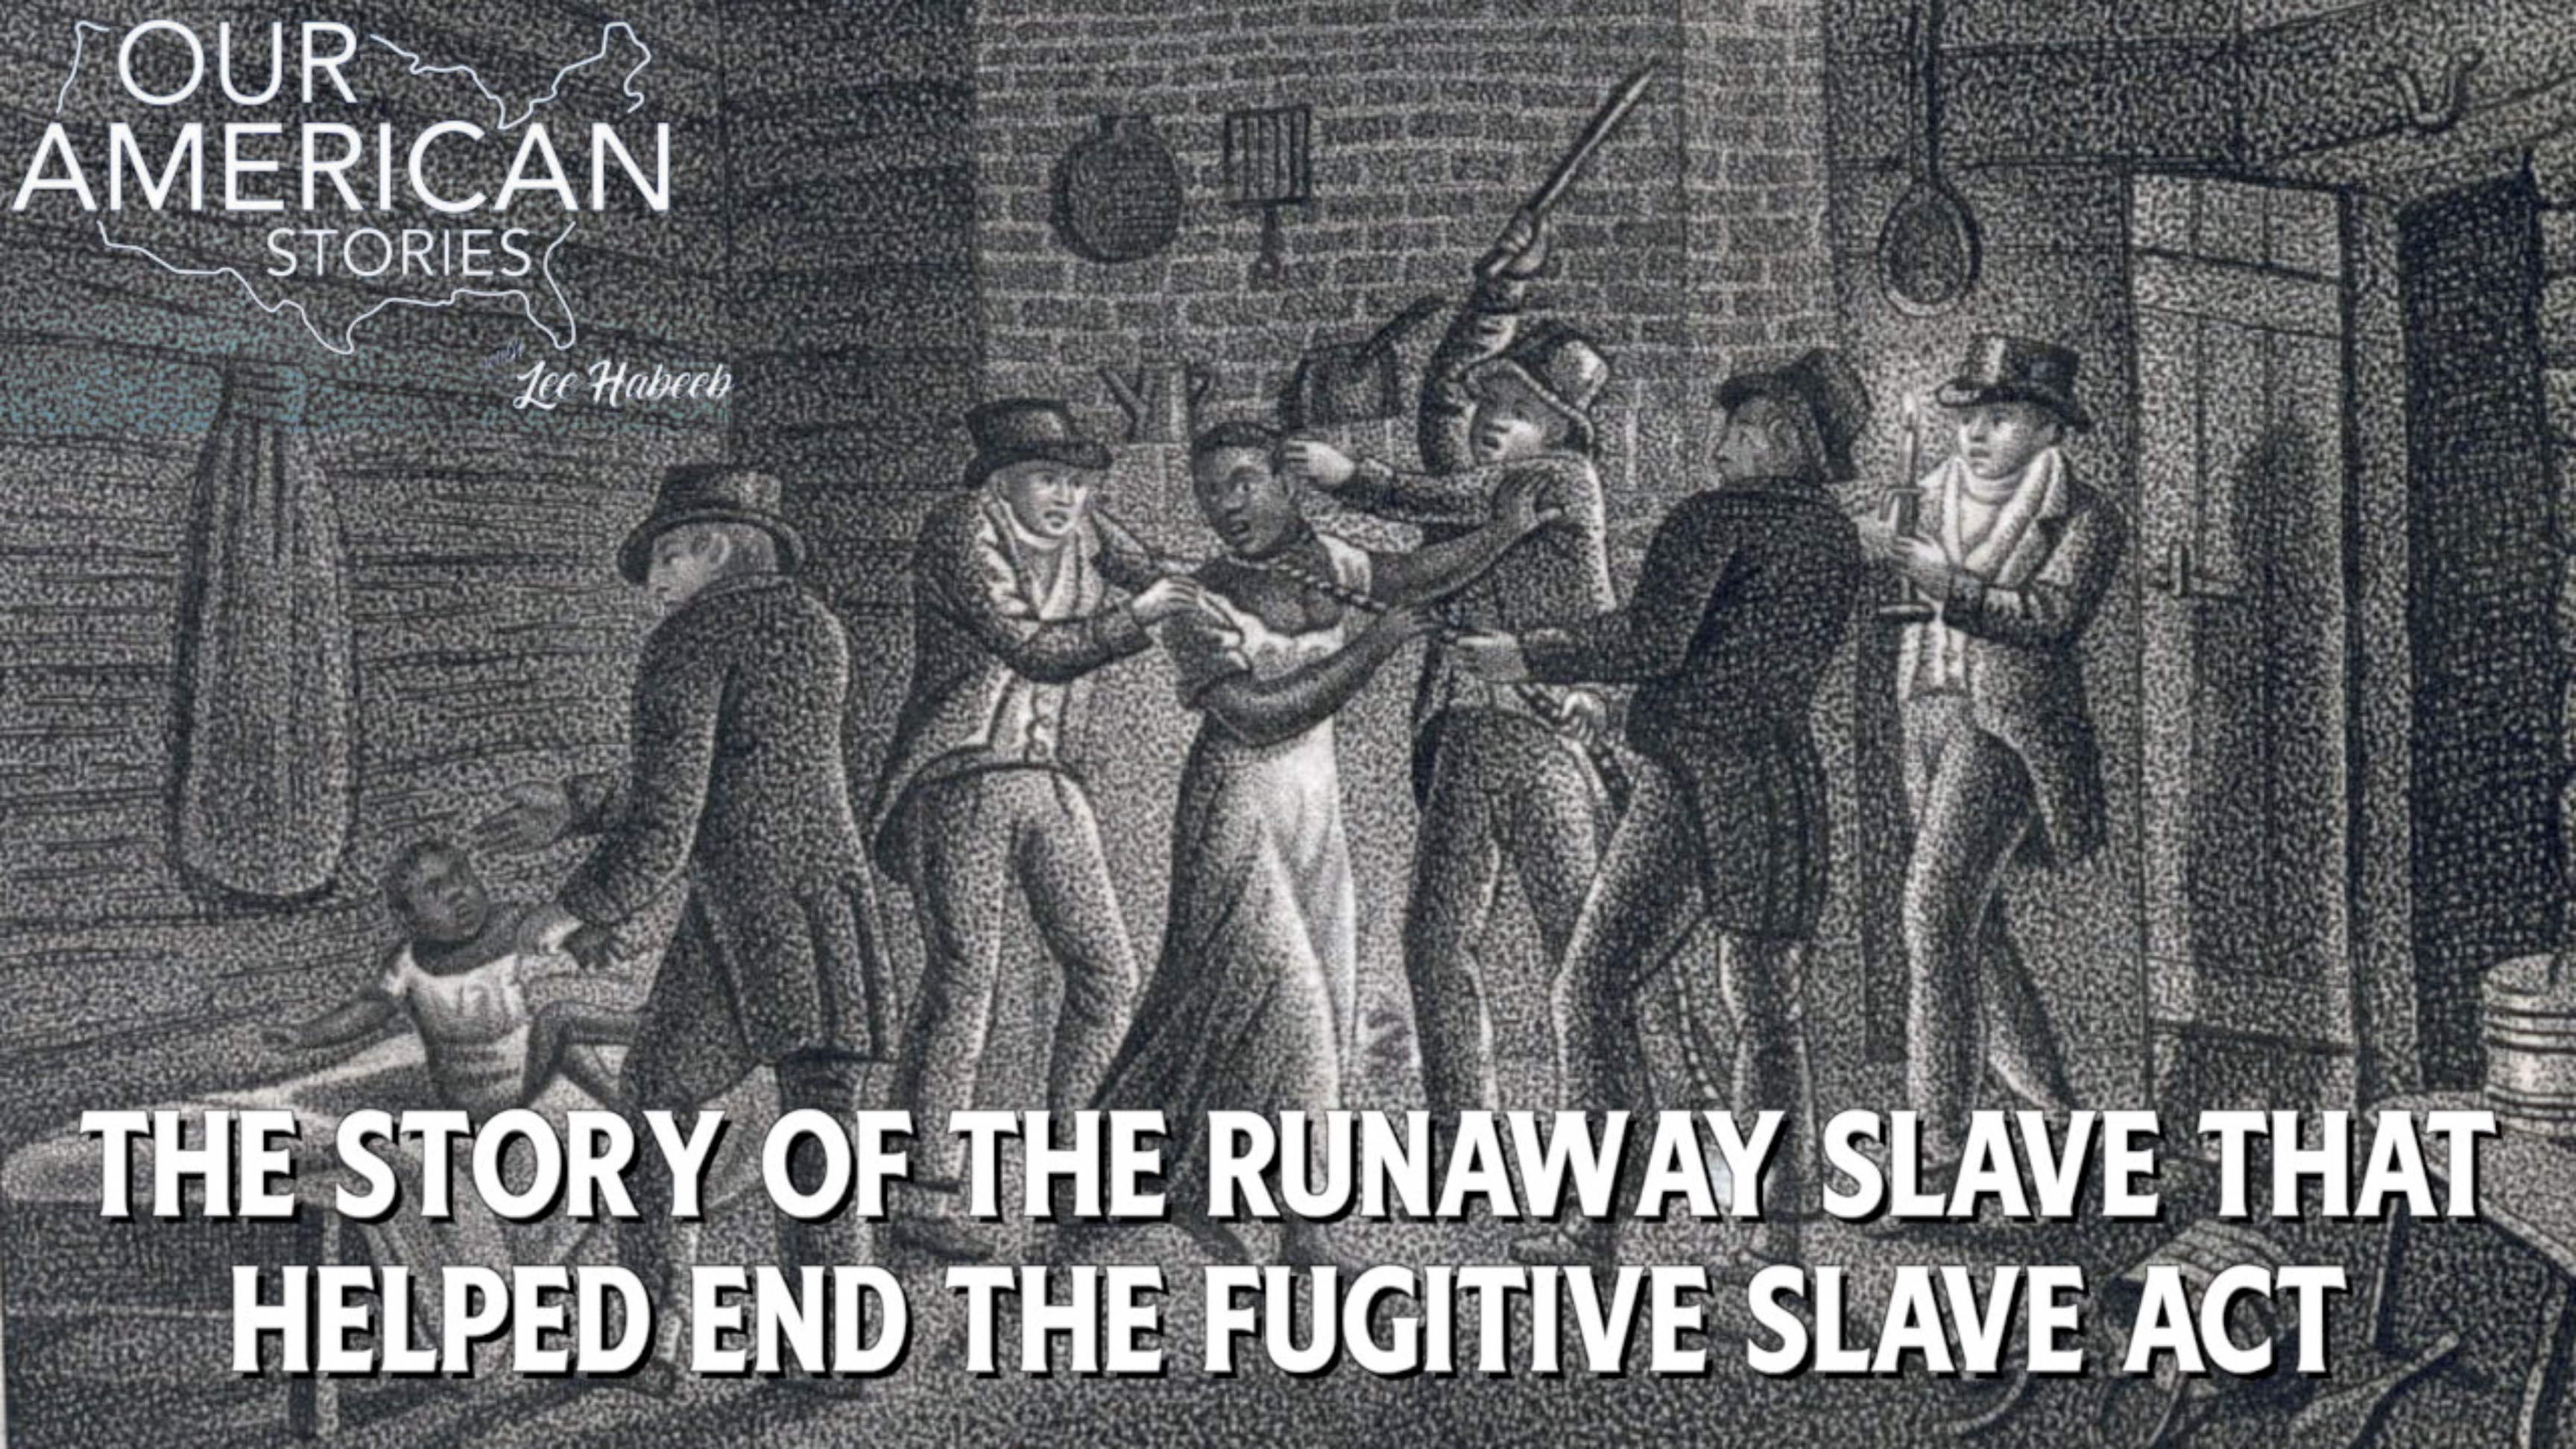 The Story of the Runaway Slave That Helped End the Fugitive Slave Act